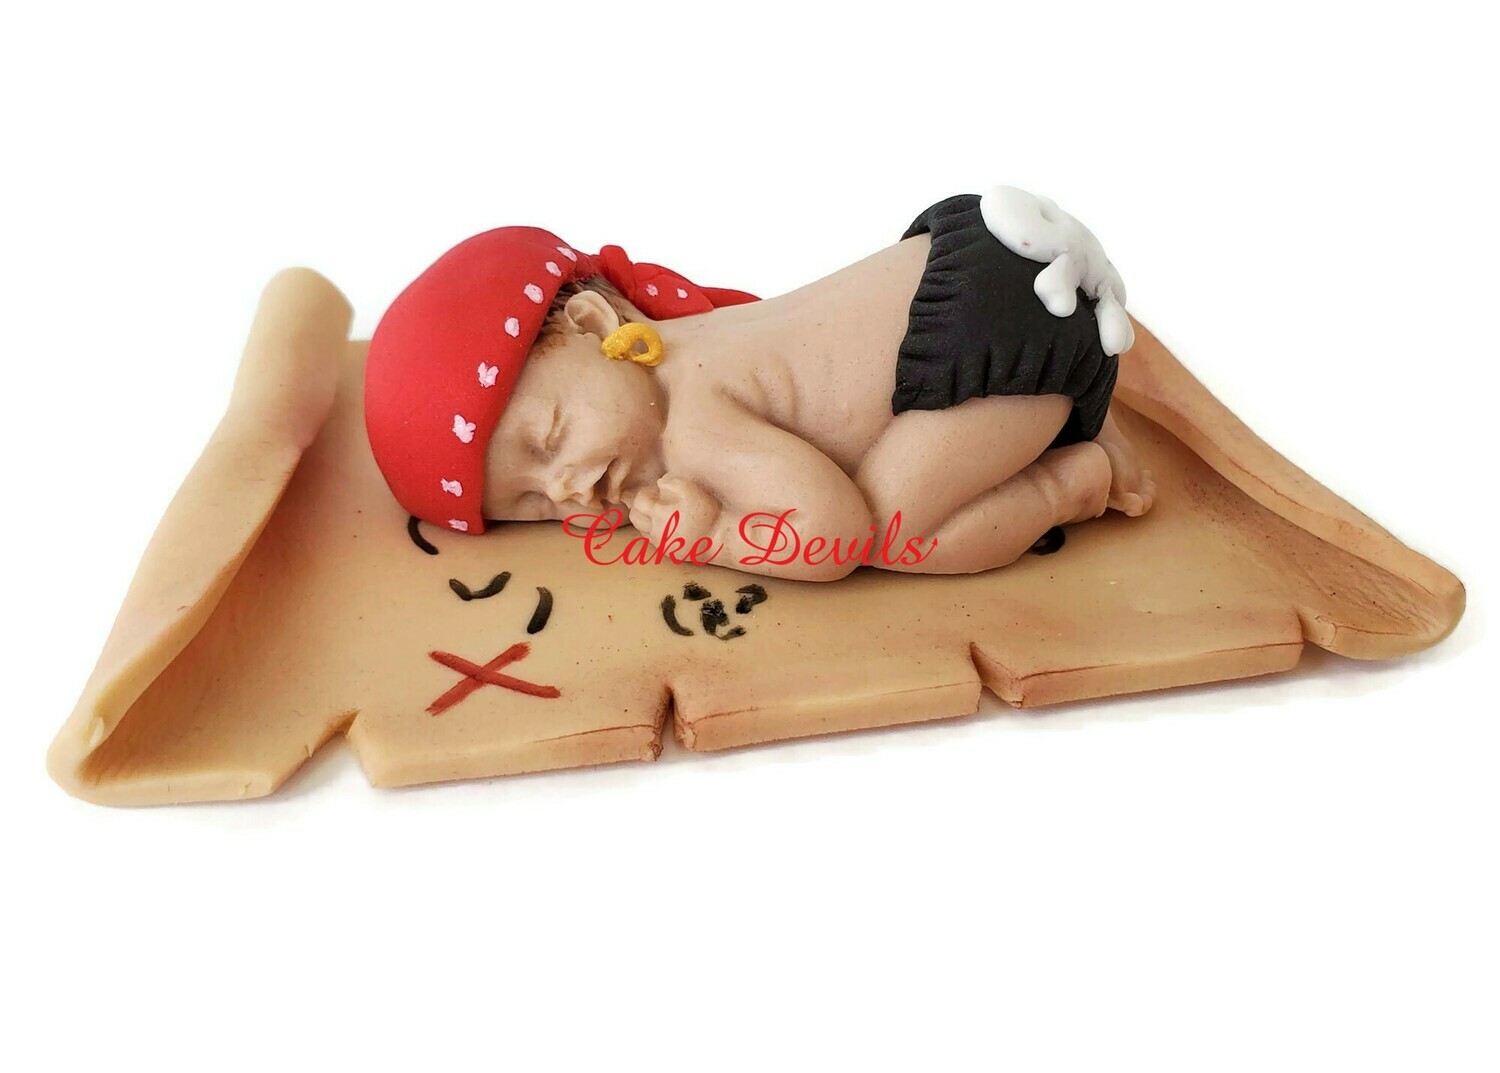 Fondant Pirate Baby Shower Cake Topper with Treasure Map, great for Jolly Roger, Buccaneer, or Ahoy Matey theme!